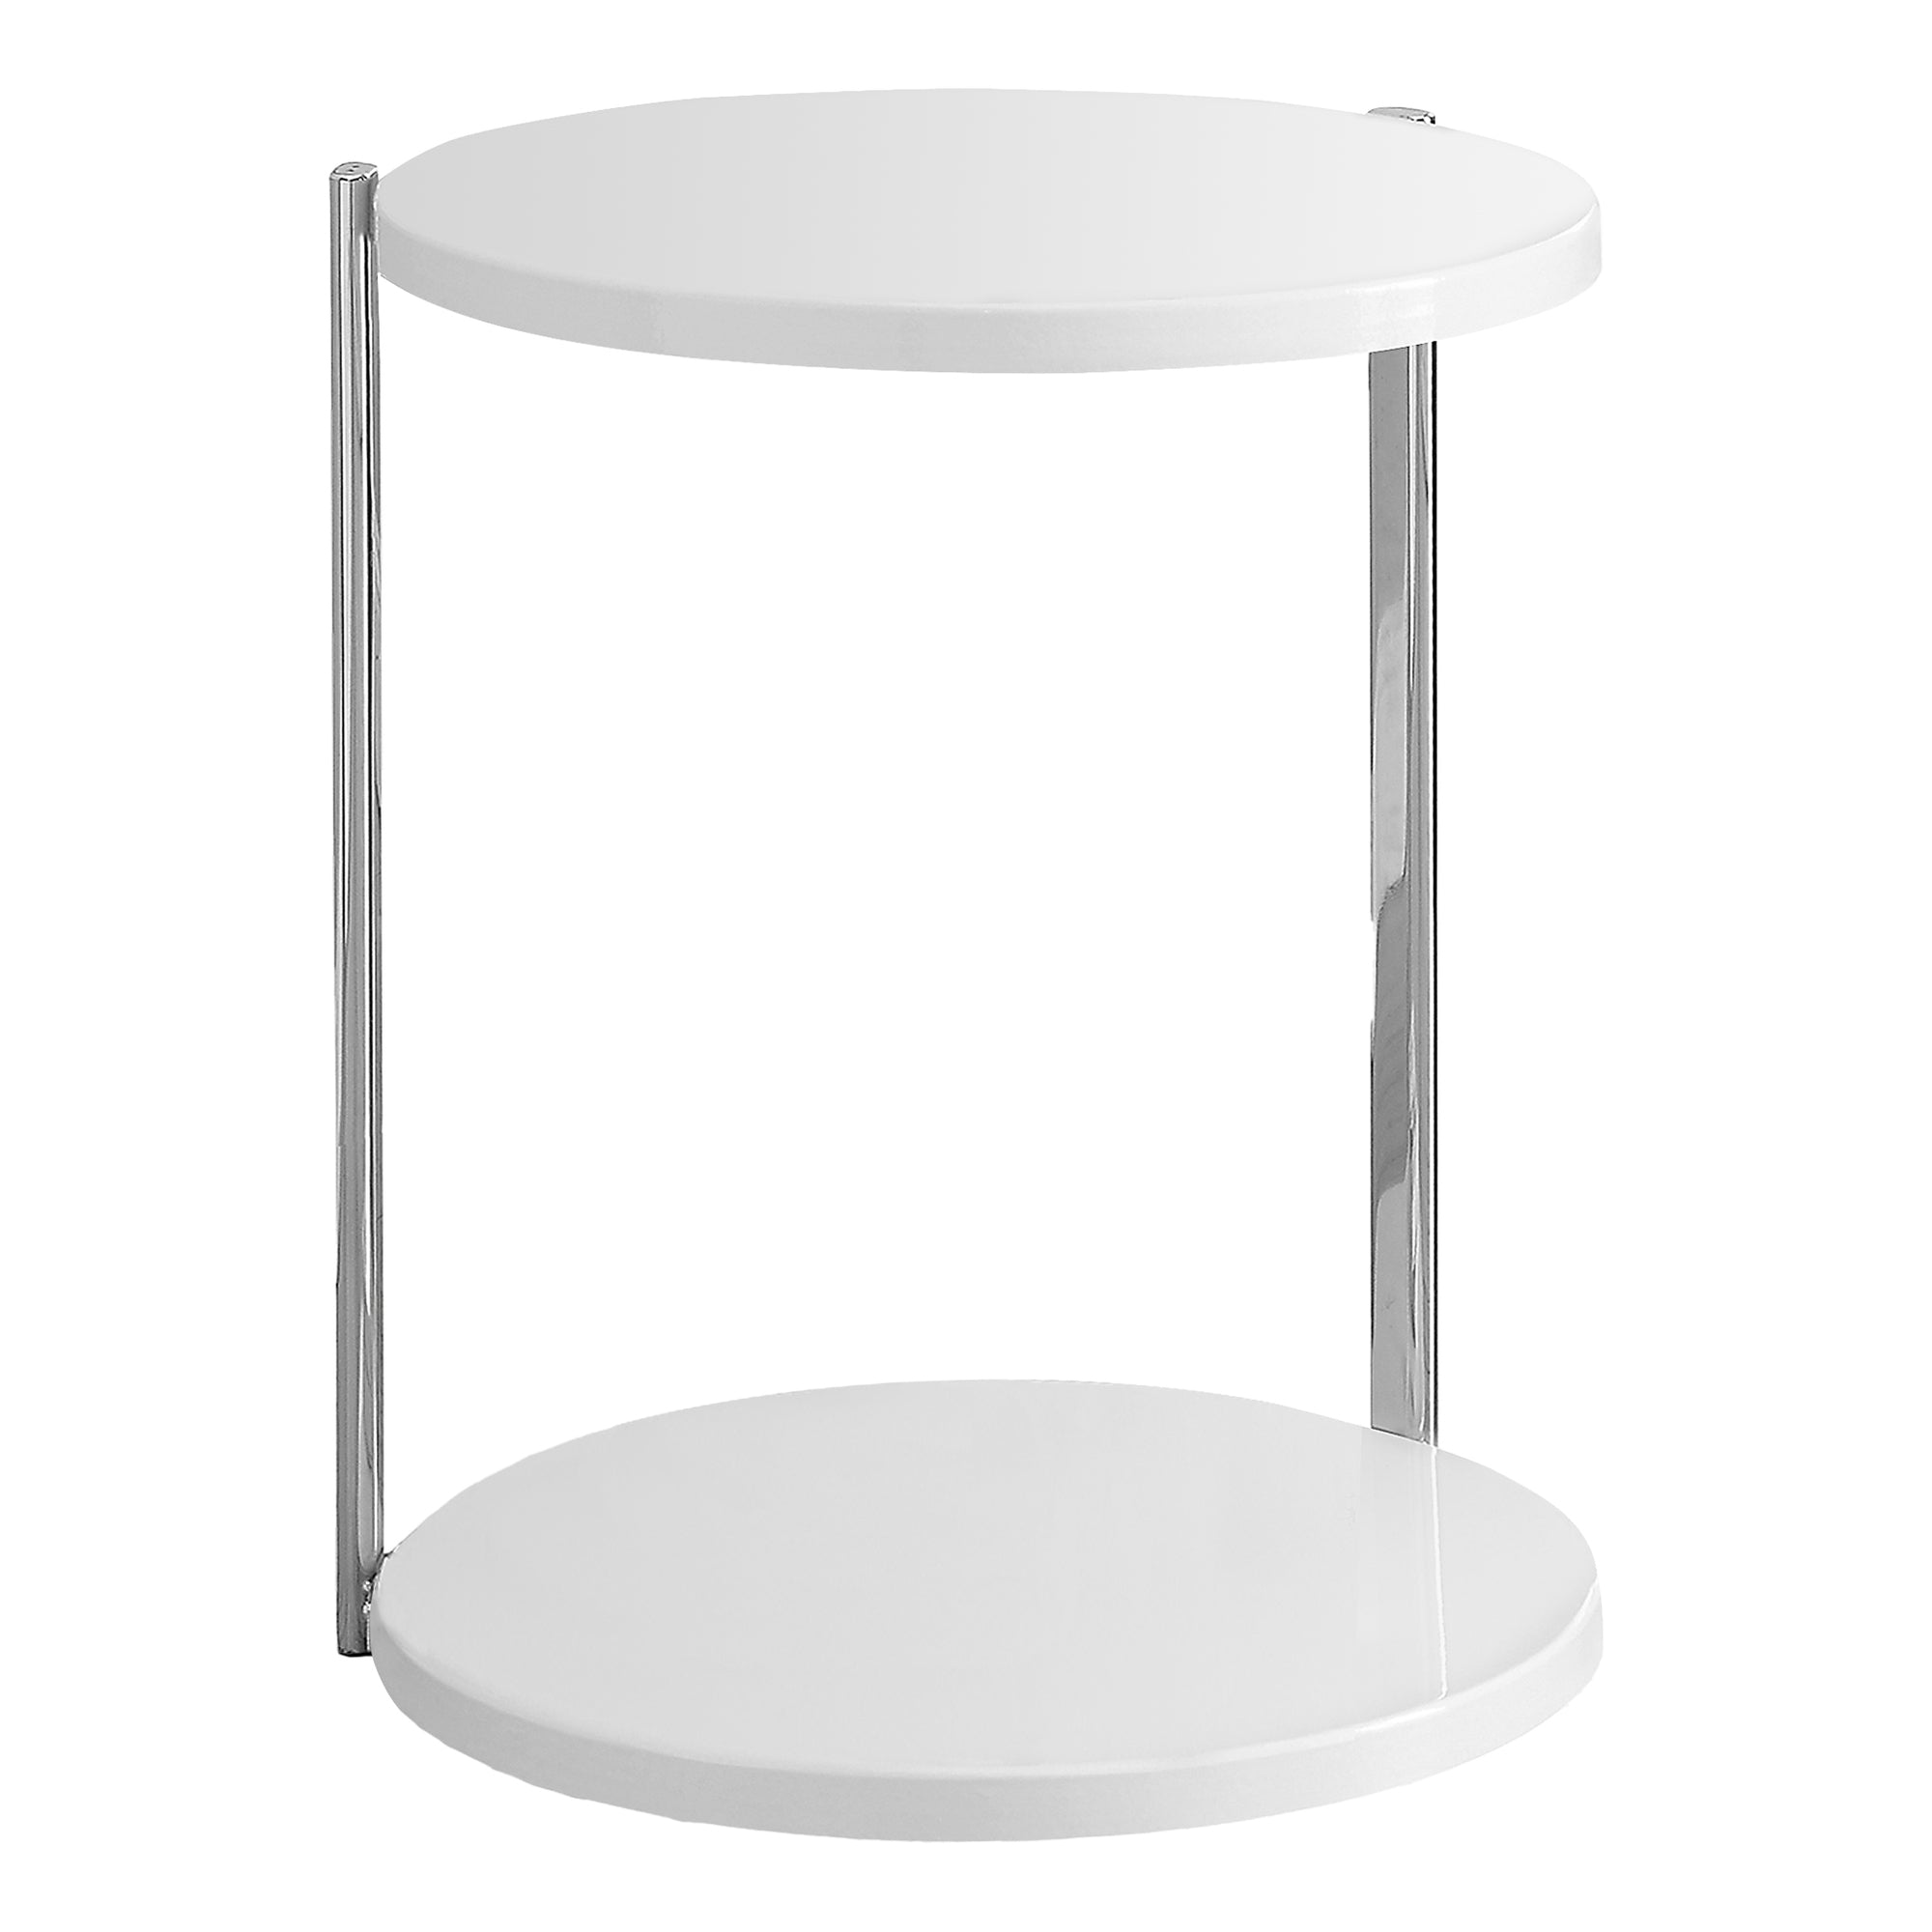 ACCENT TABLE - GLOSSY WHITE / CHROME METAL